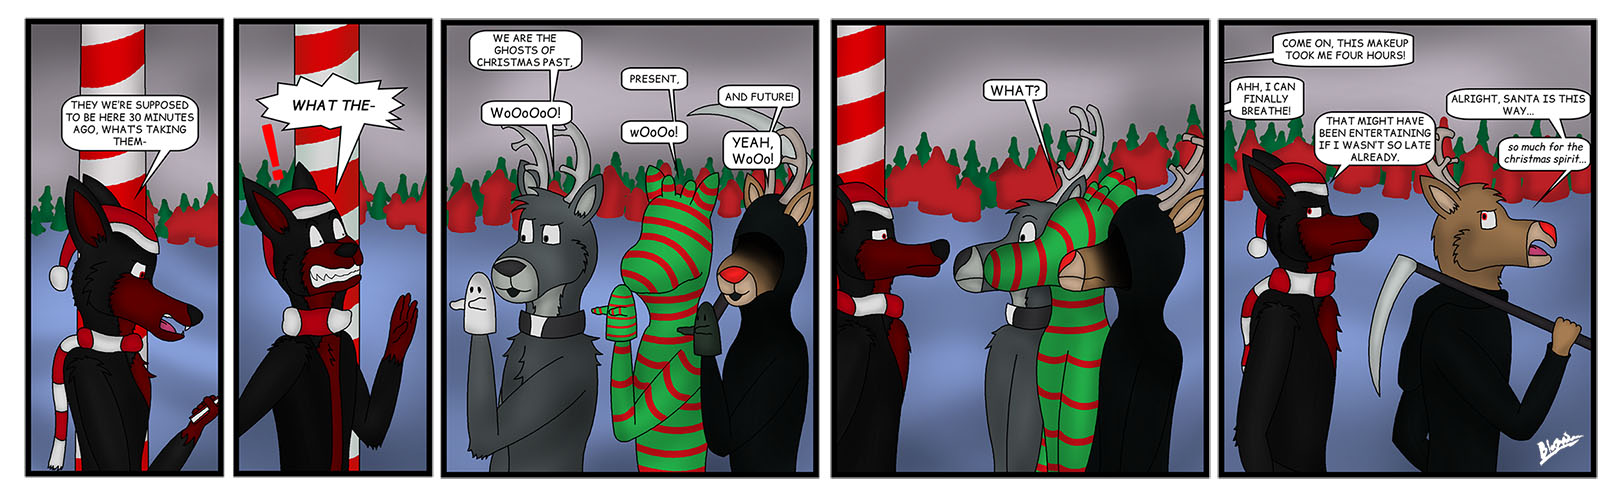 REINDEER GAMES: NOT AS FUN AS PREVIOUSLY THOUGHT